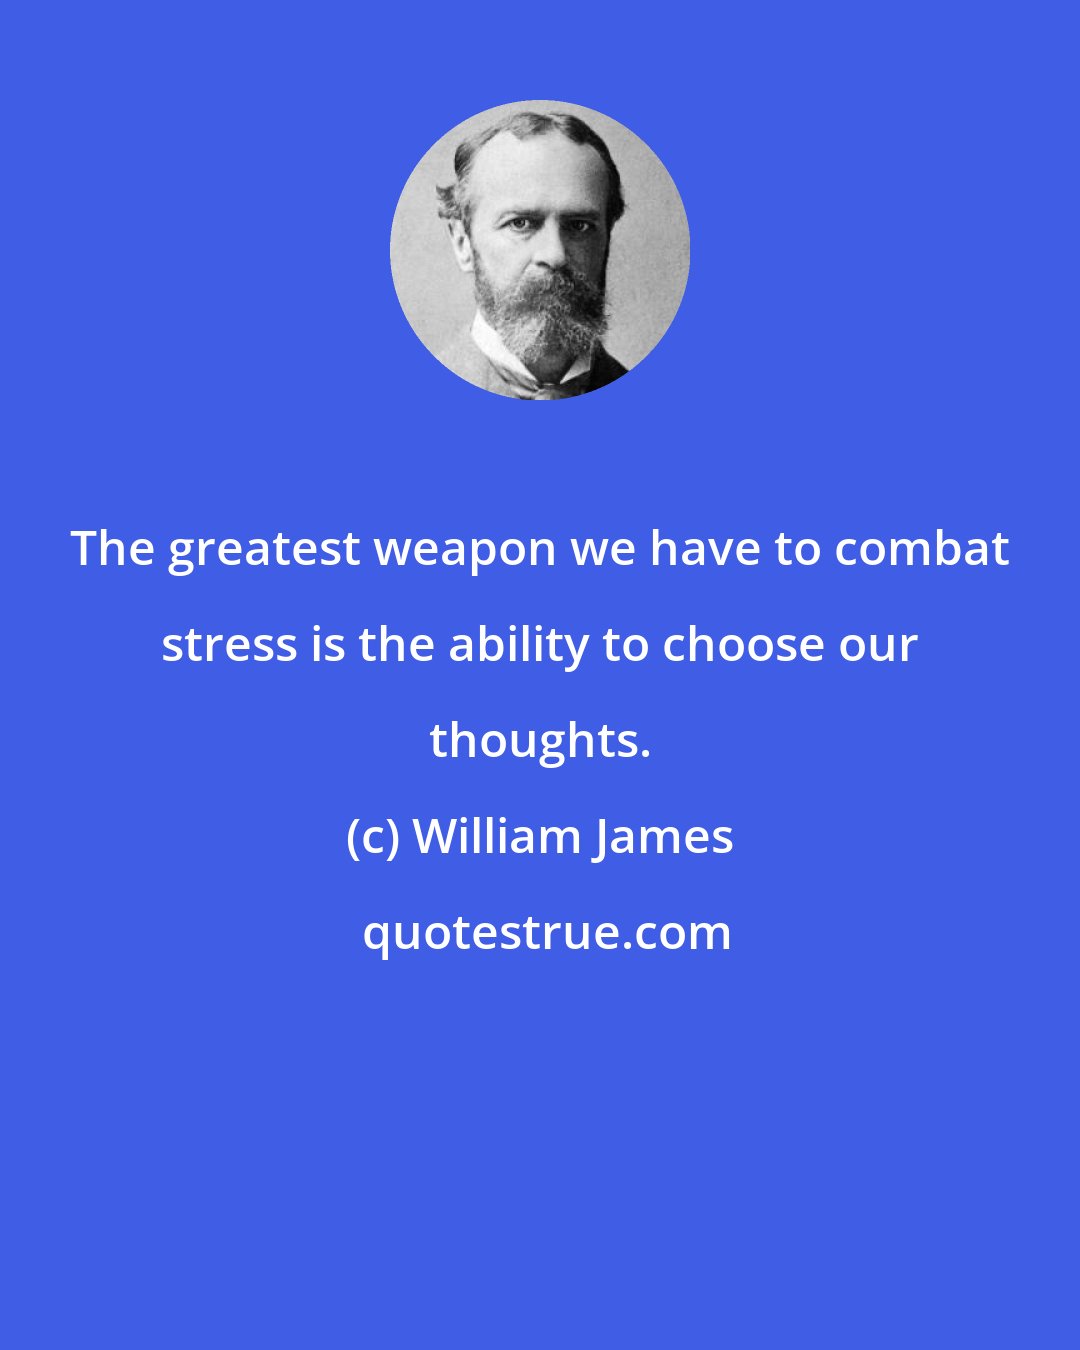 William James: The greatest weapon we have to combat stress is the ability to choose our thoughts.